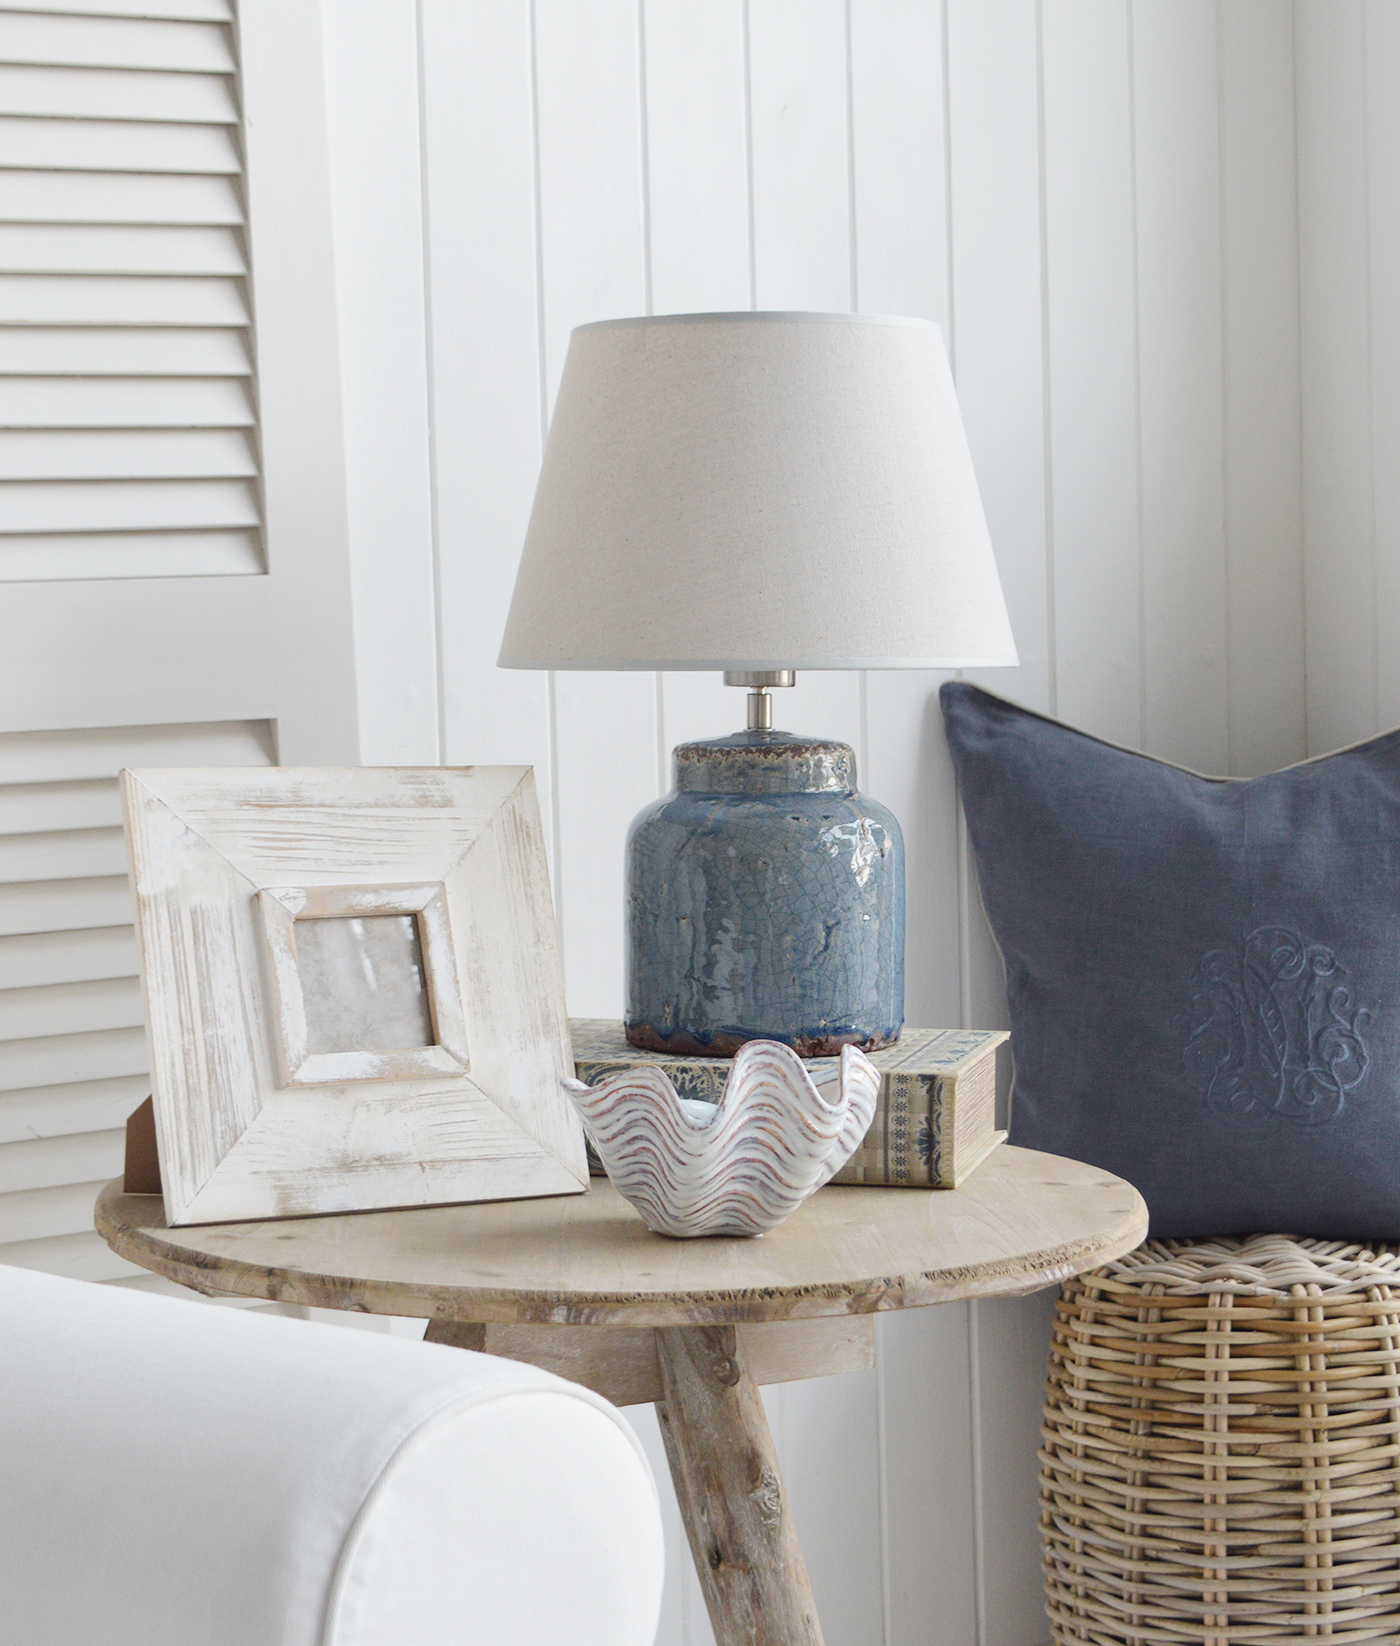 The Blue Comptom ceramic lamp alongside the Driftwood table, willow stool and Richmond cushion for texture and warmth to a New England or Hamptons style interior